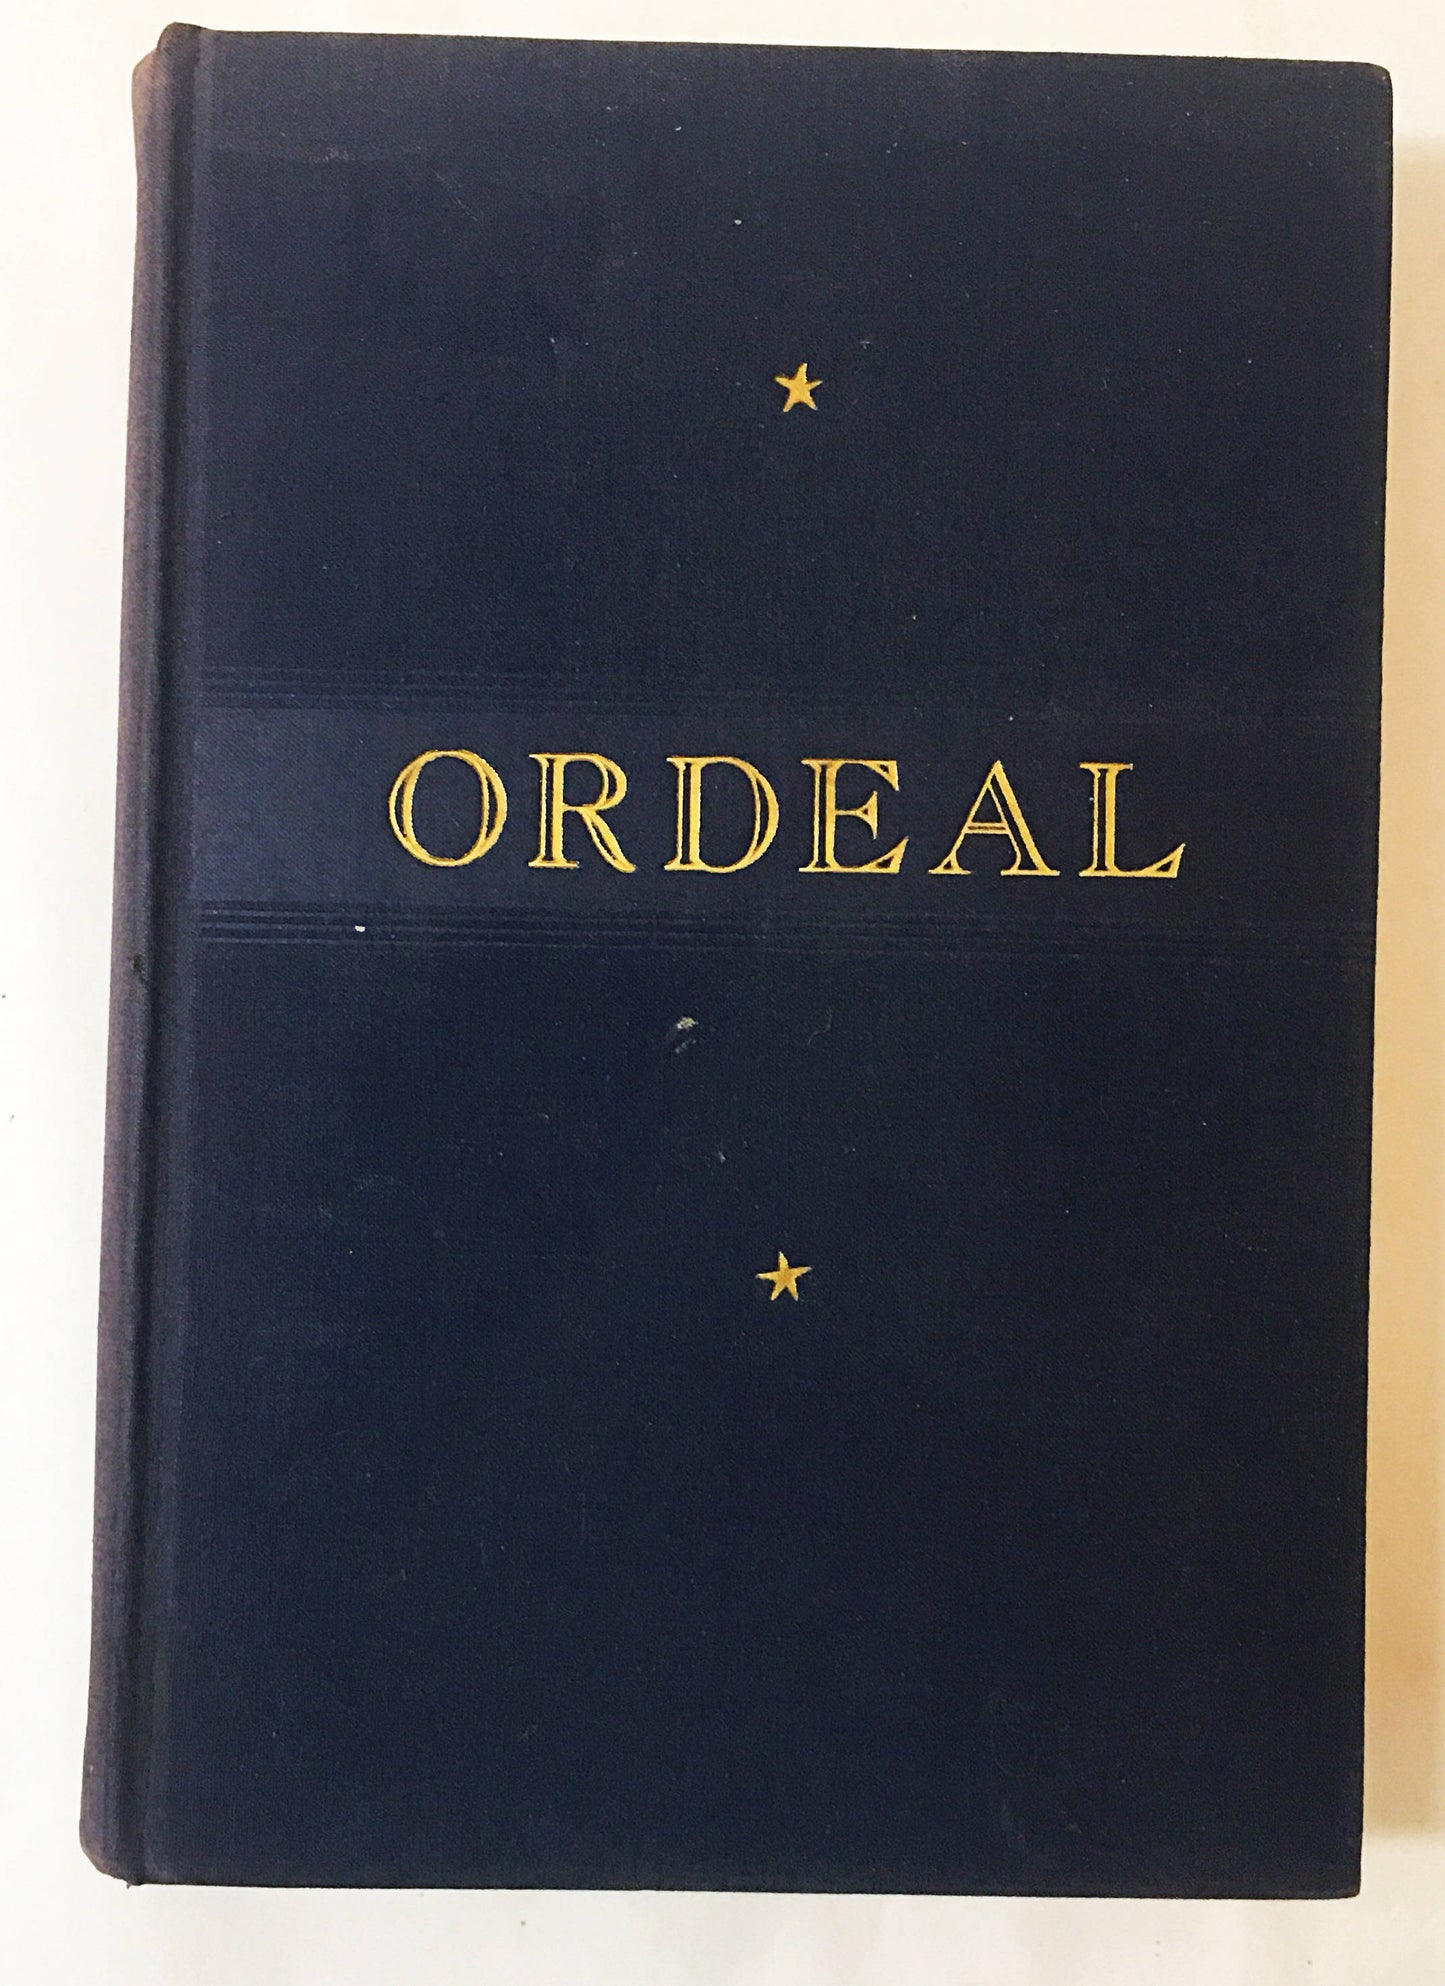 Blue cloth covered vintage military book Ordeal by Nevil Shute